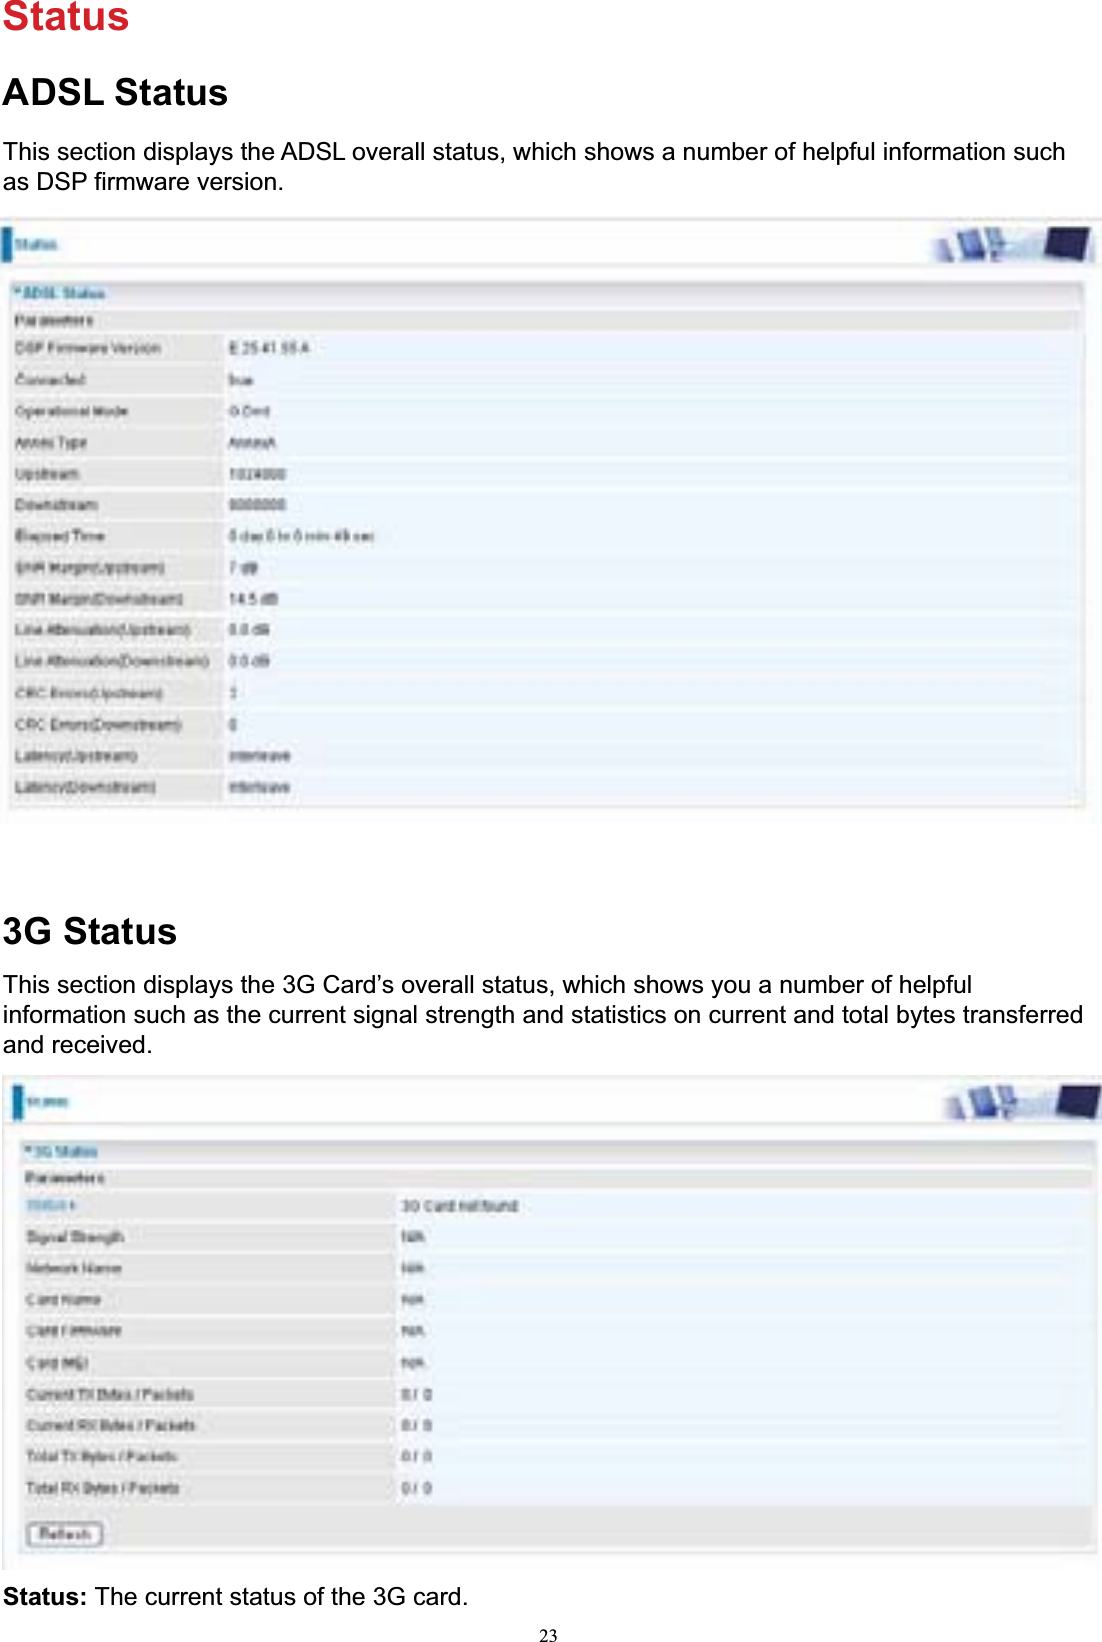 23StatusADSL StatusThis section displays the ADSL overall status, which shows a number of helpful information such as DSP firmware version. 3G StatusThis section displays the 3G Card’s overall status, which shows you a number of helpful information such as the current signal strength and statistics on current and total bytes transferred and received. Status: The current status of the 3G card. 